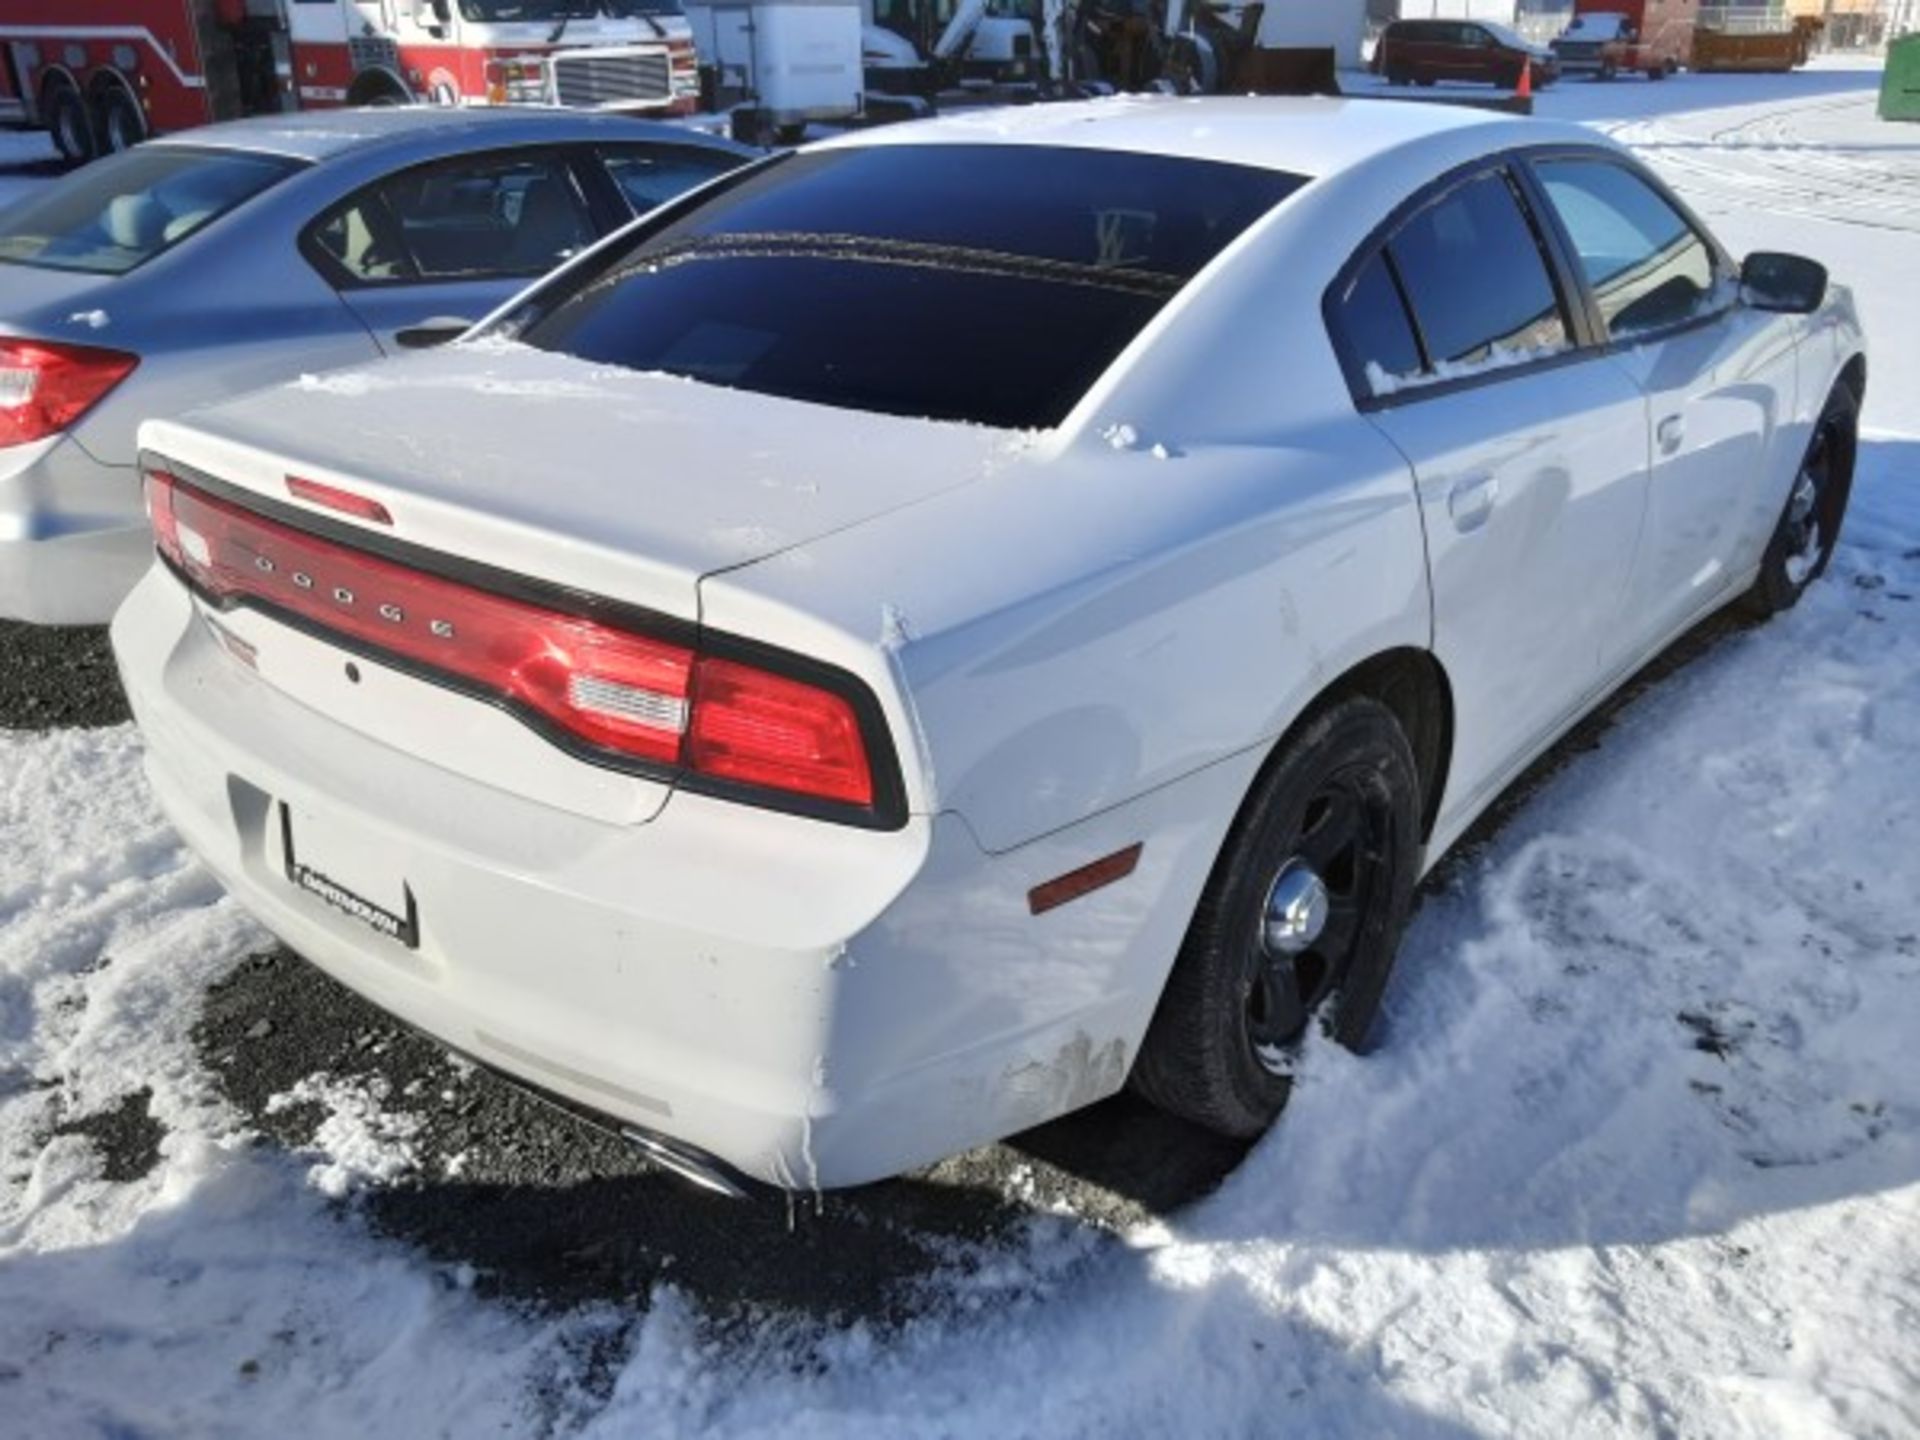 * 2012 DODGE CHARGER - Image 3 of 5